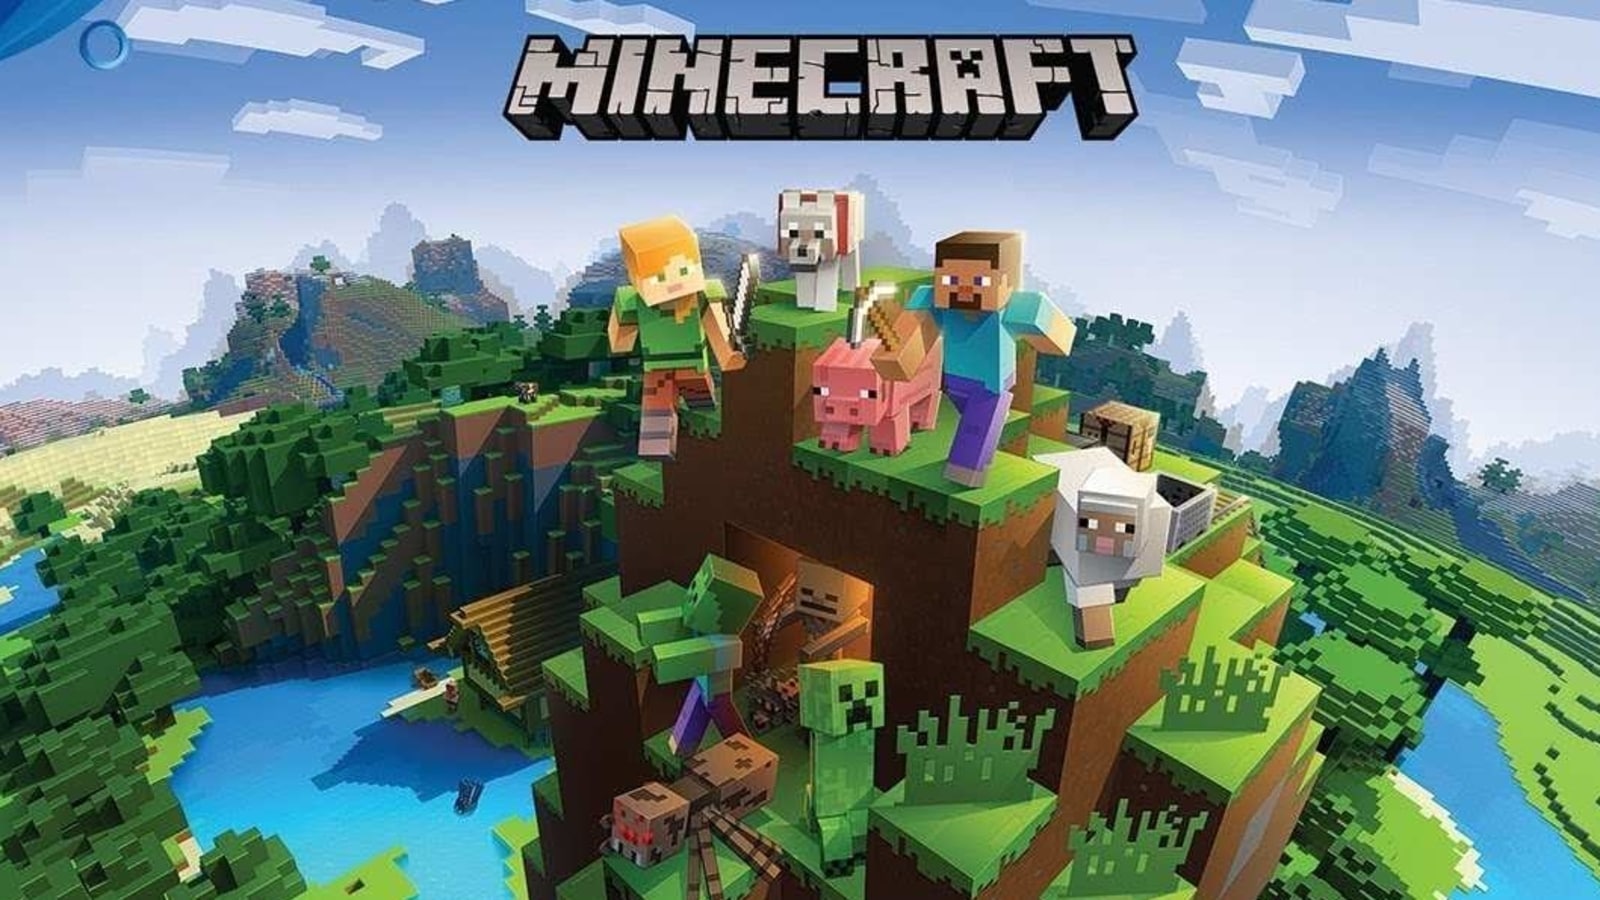 Minecraft-Related Fake Apps Cheat Innumerable Google Play Users, Avast warns